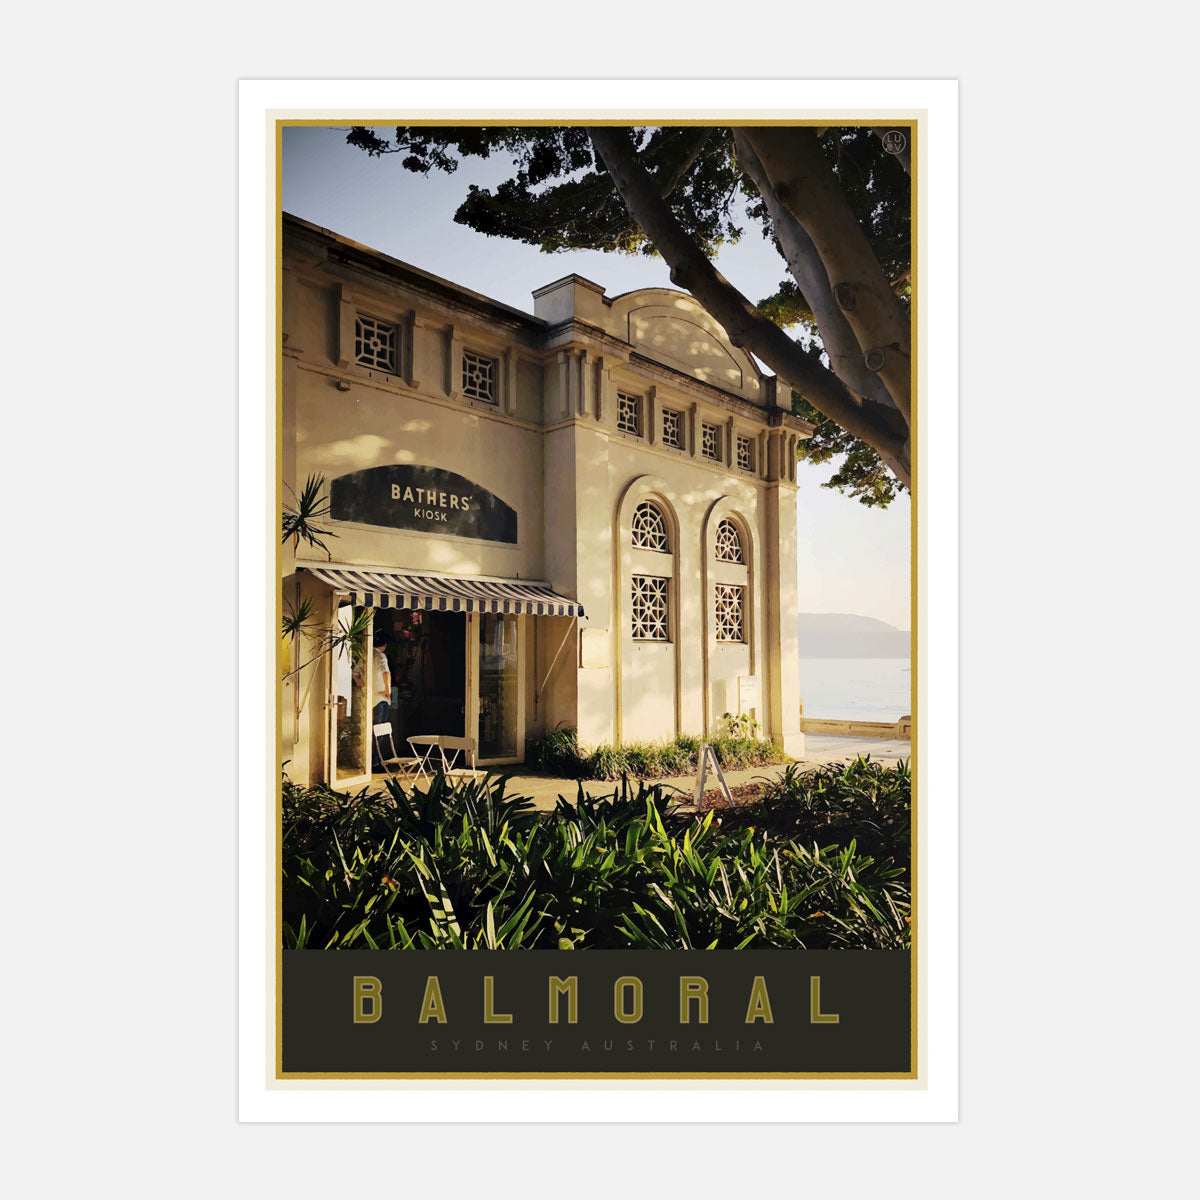 Balmoral Beach poster - Sydney - original design by placesweluv travel style 